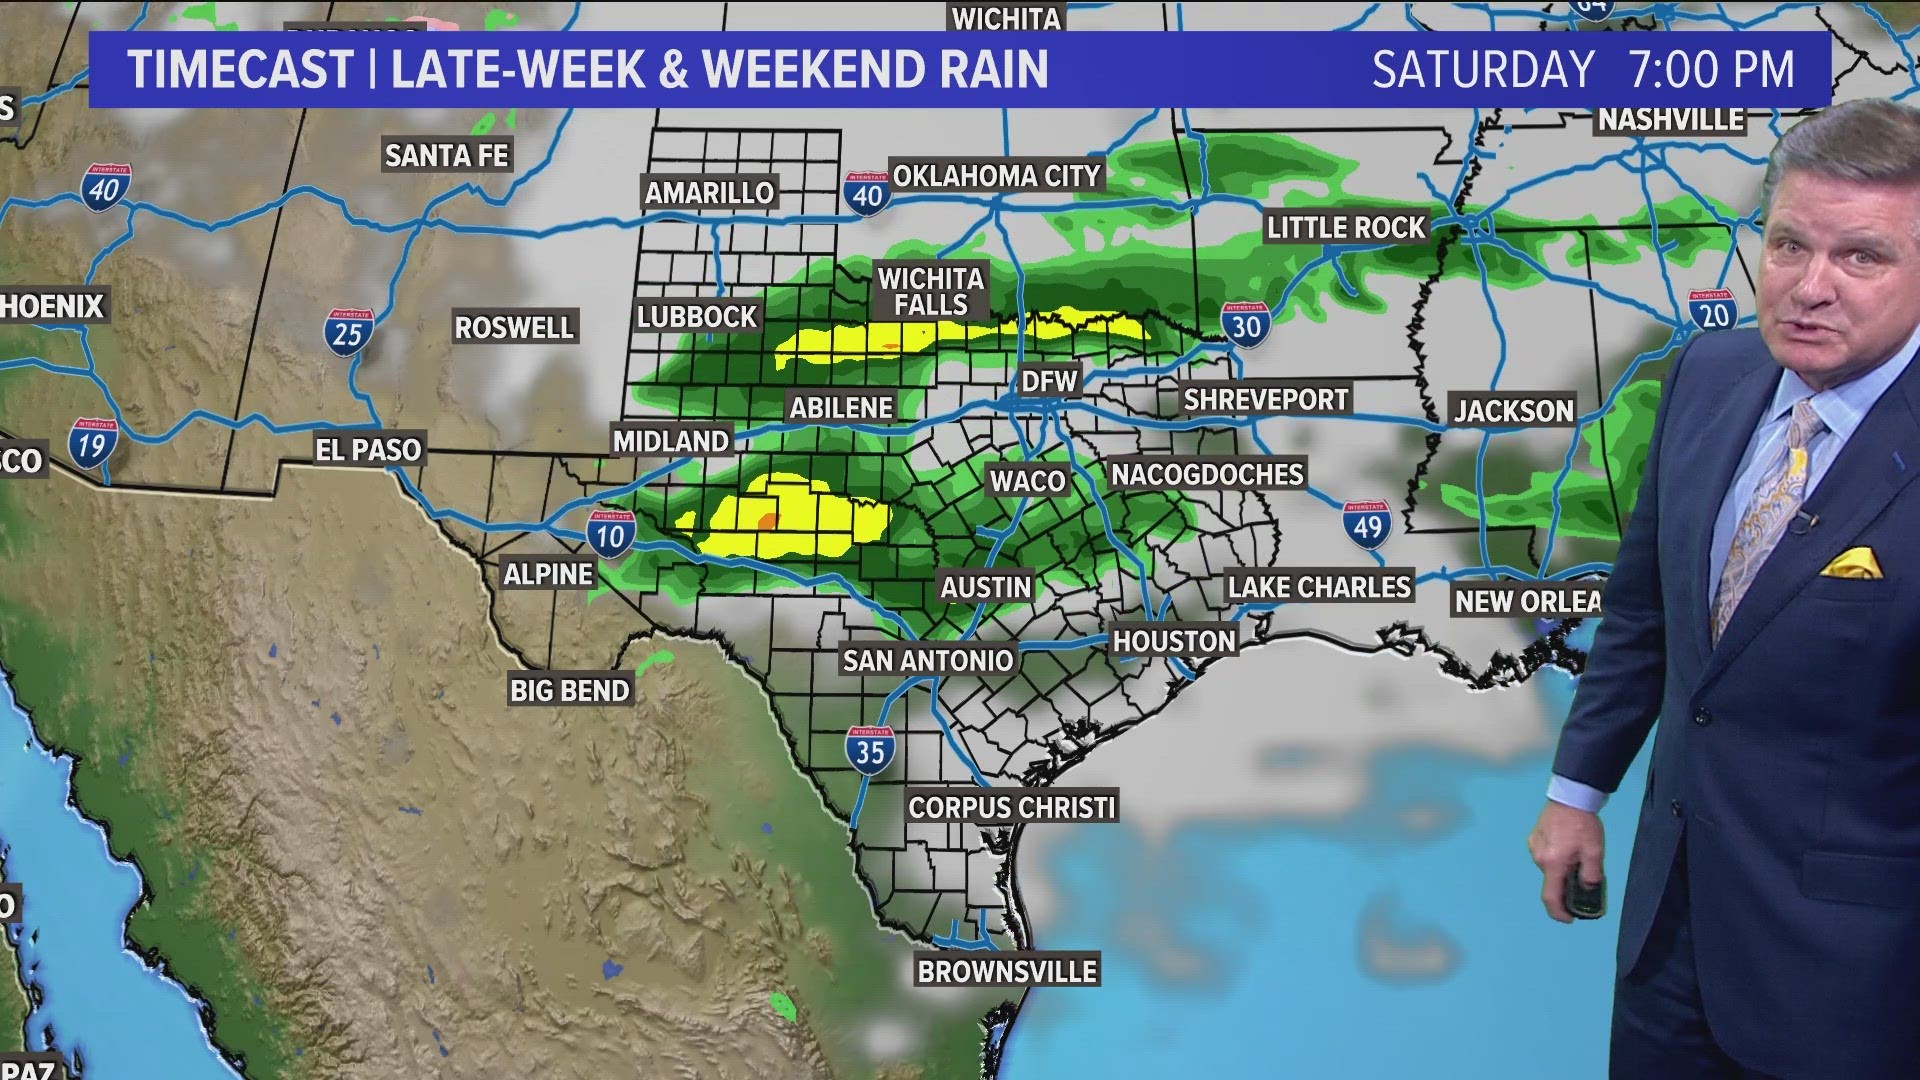 About 40% of North Texas is expected to see rain on Thursday.